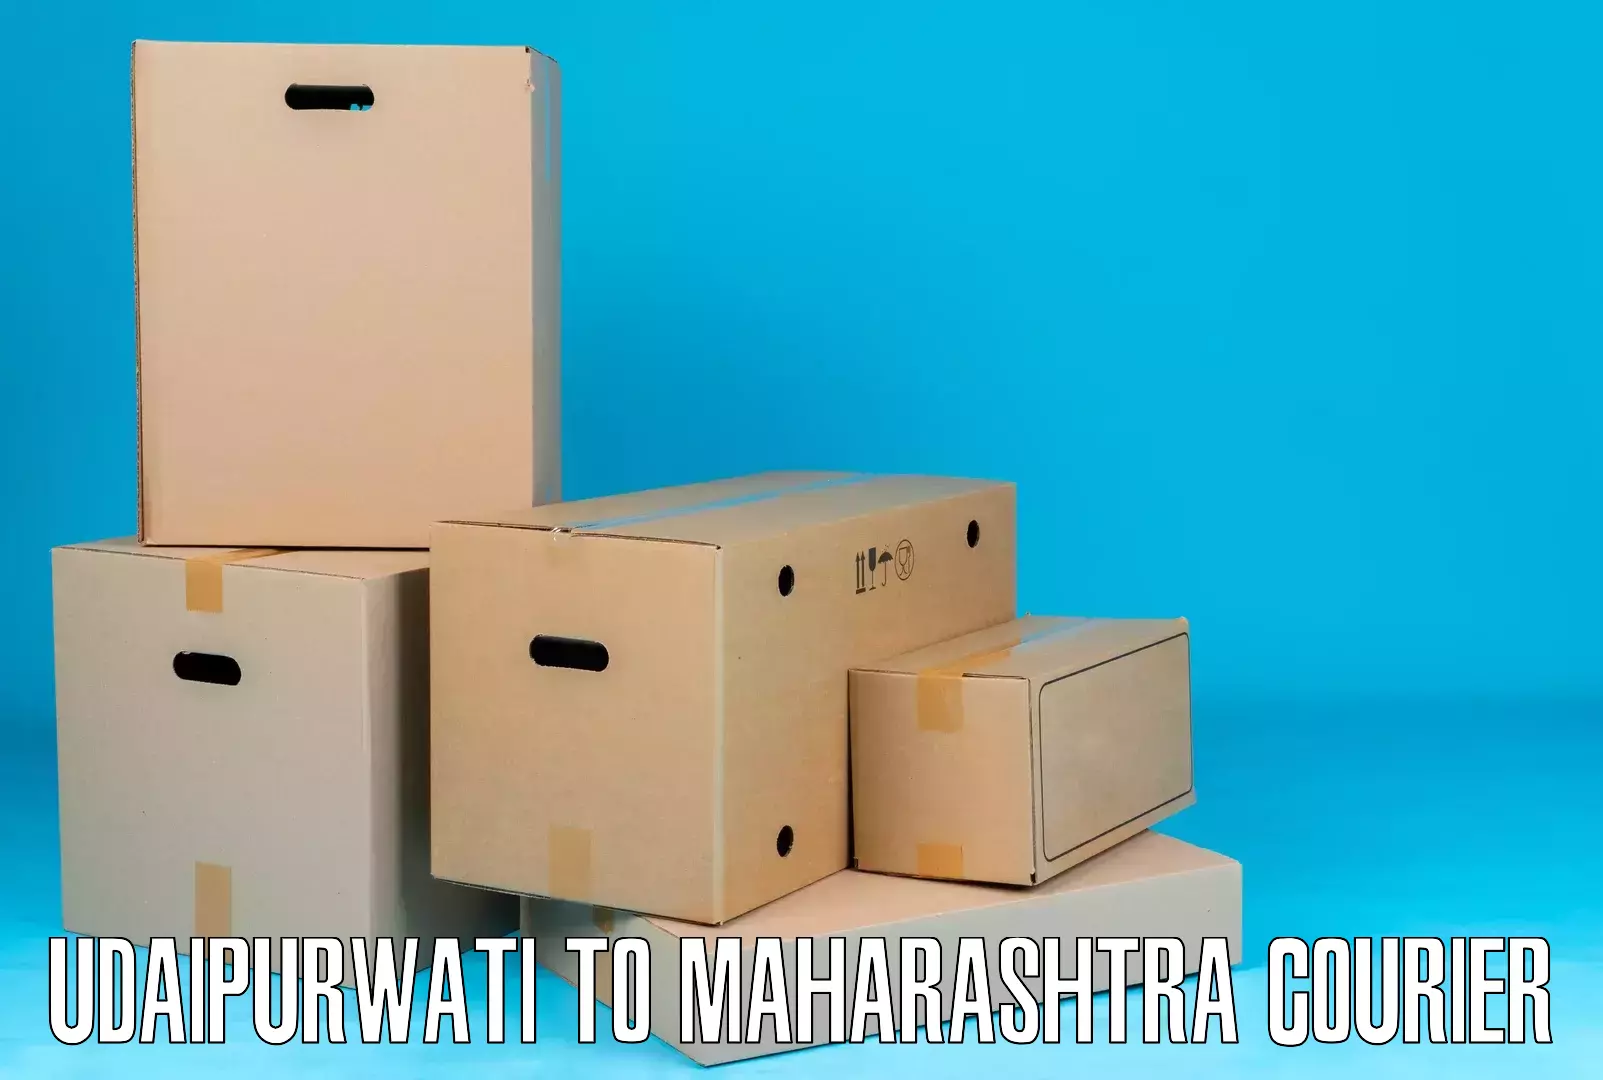 Cost-effective courier options Udaipurwati to Yeola